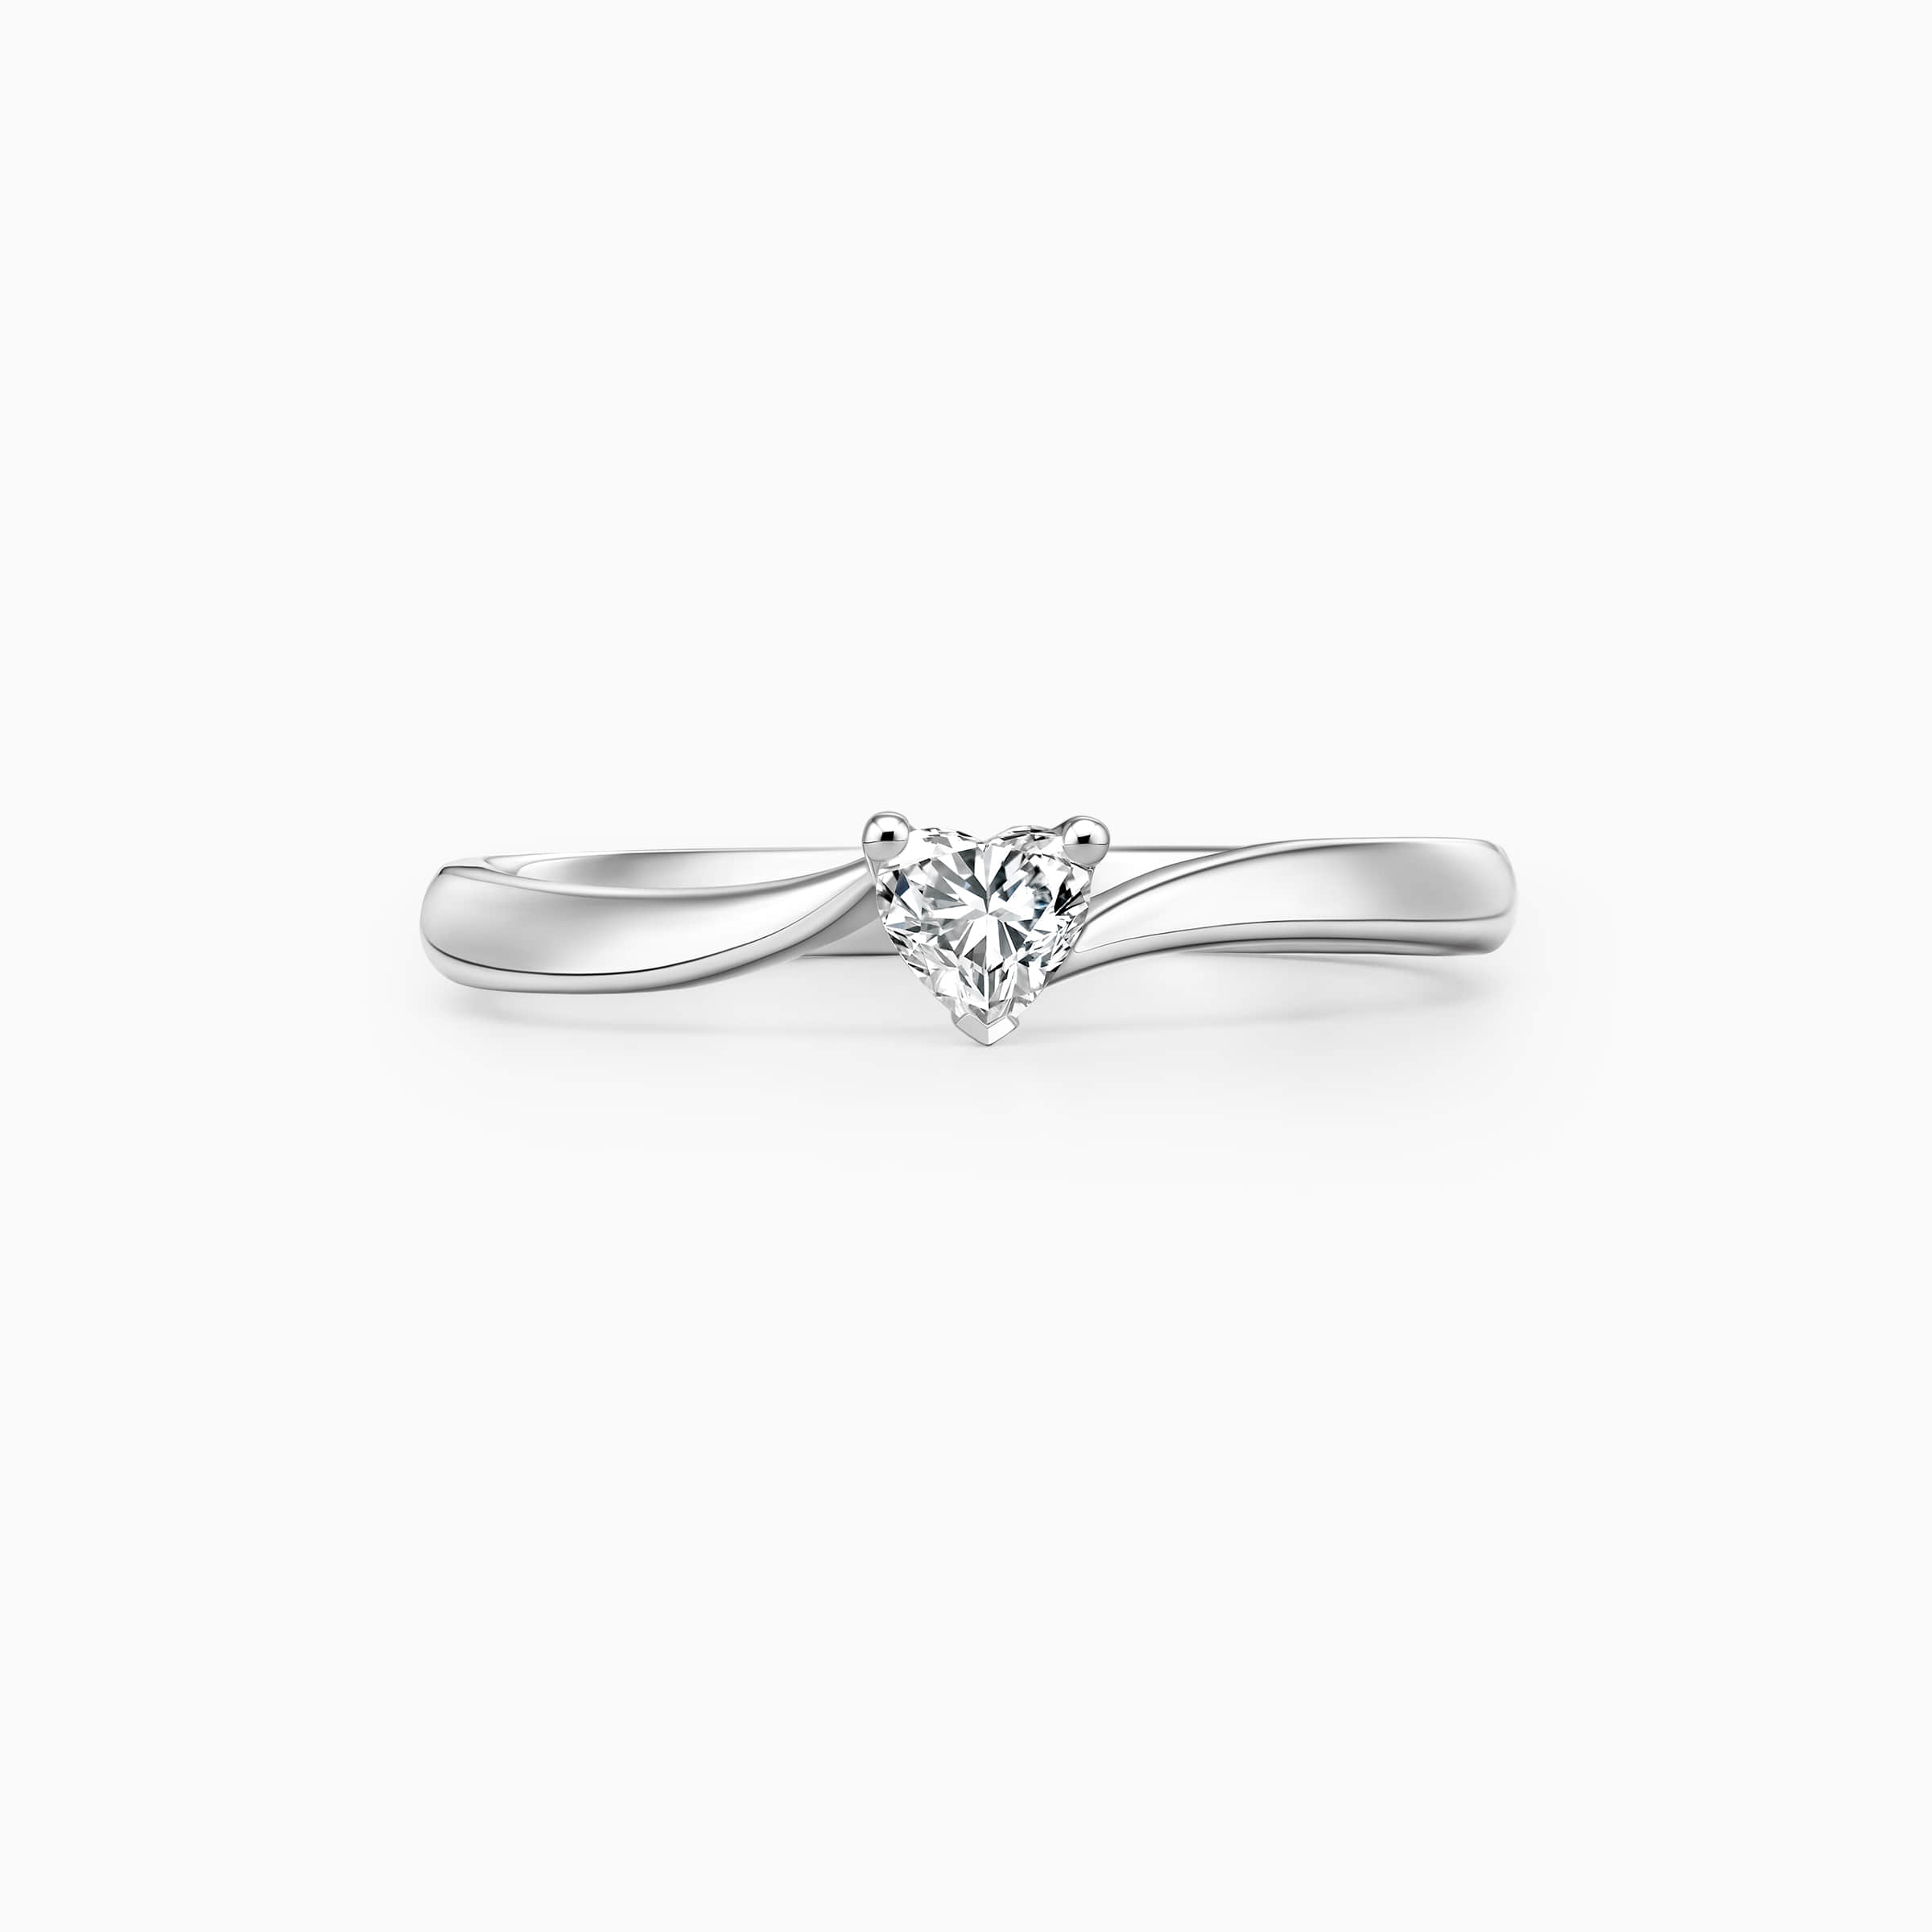 darry ring heart shaped solitaire engagement ring front view